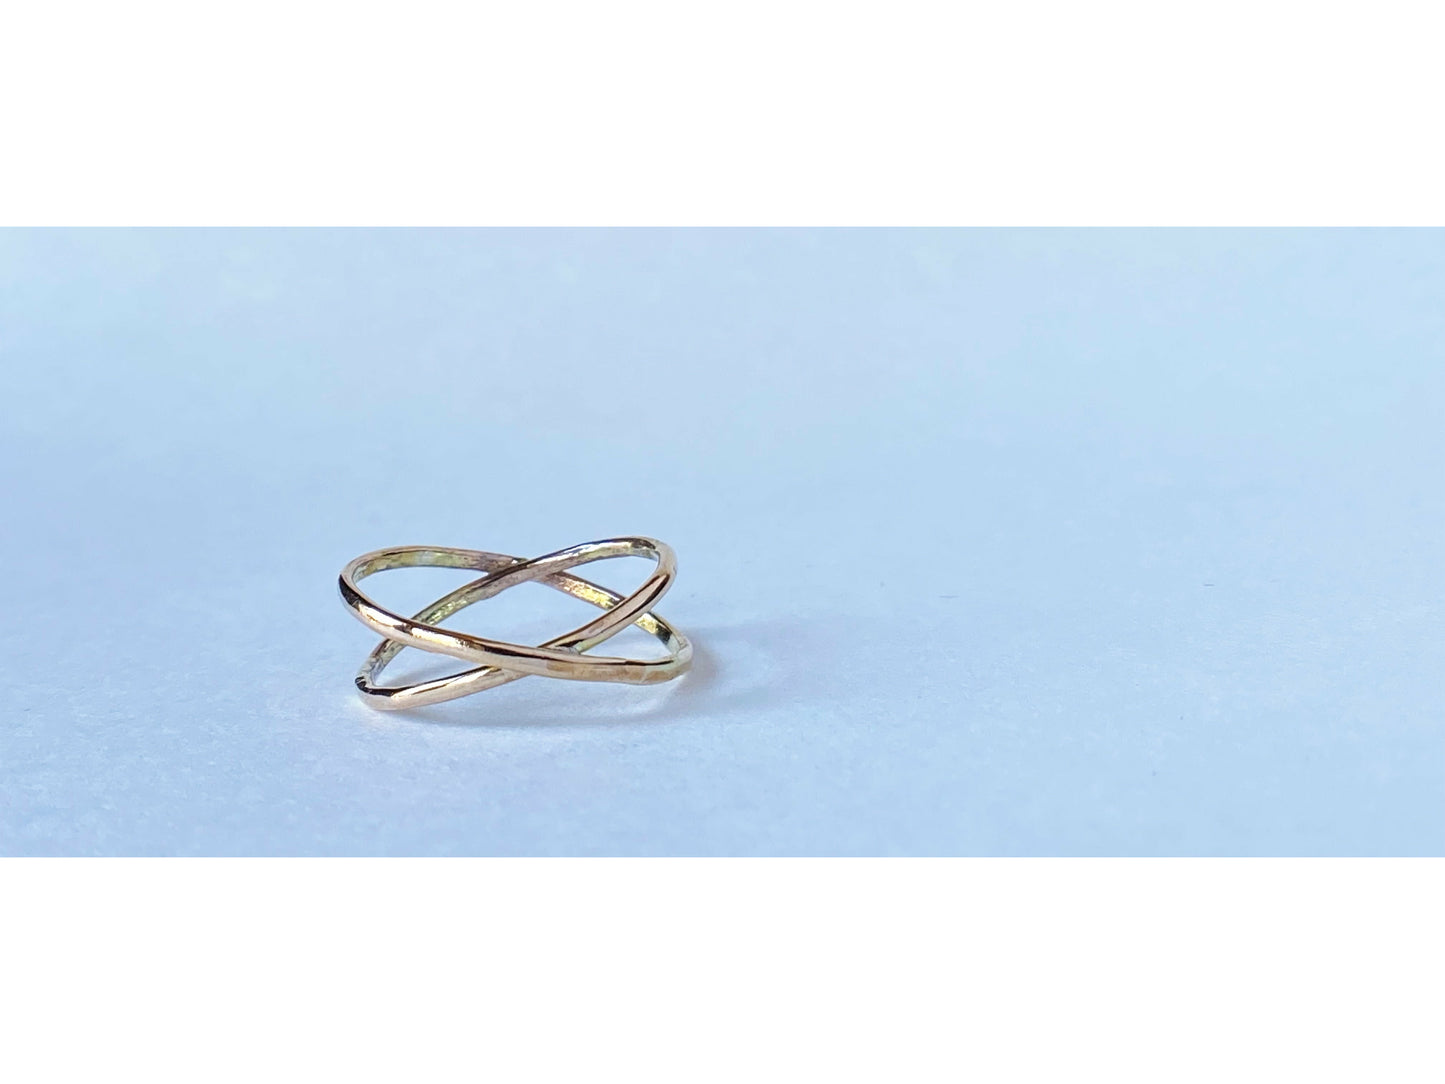 Two gold filled rings cross to make an x shape or a "twist" 